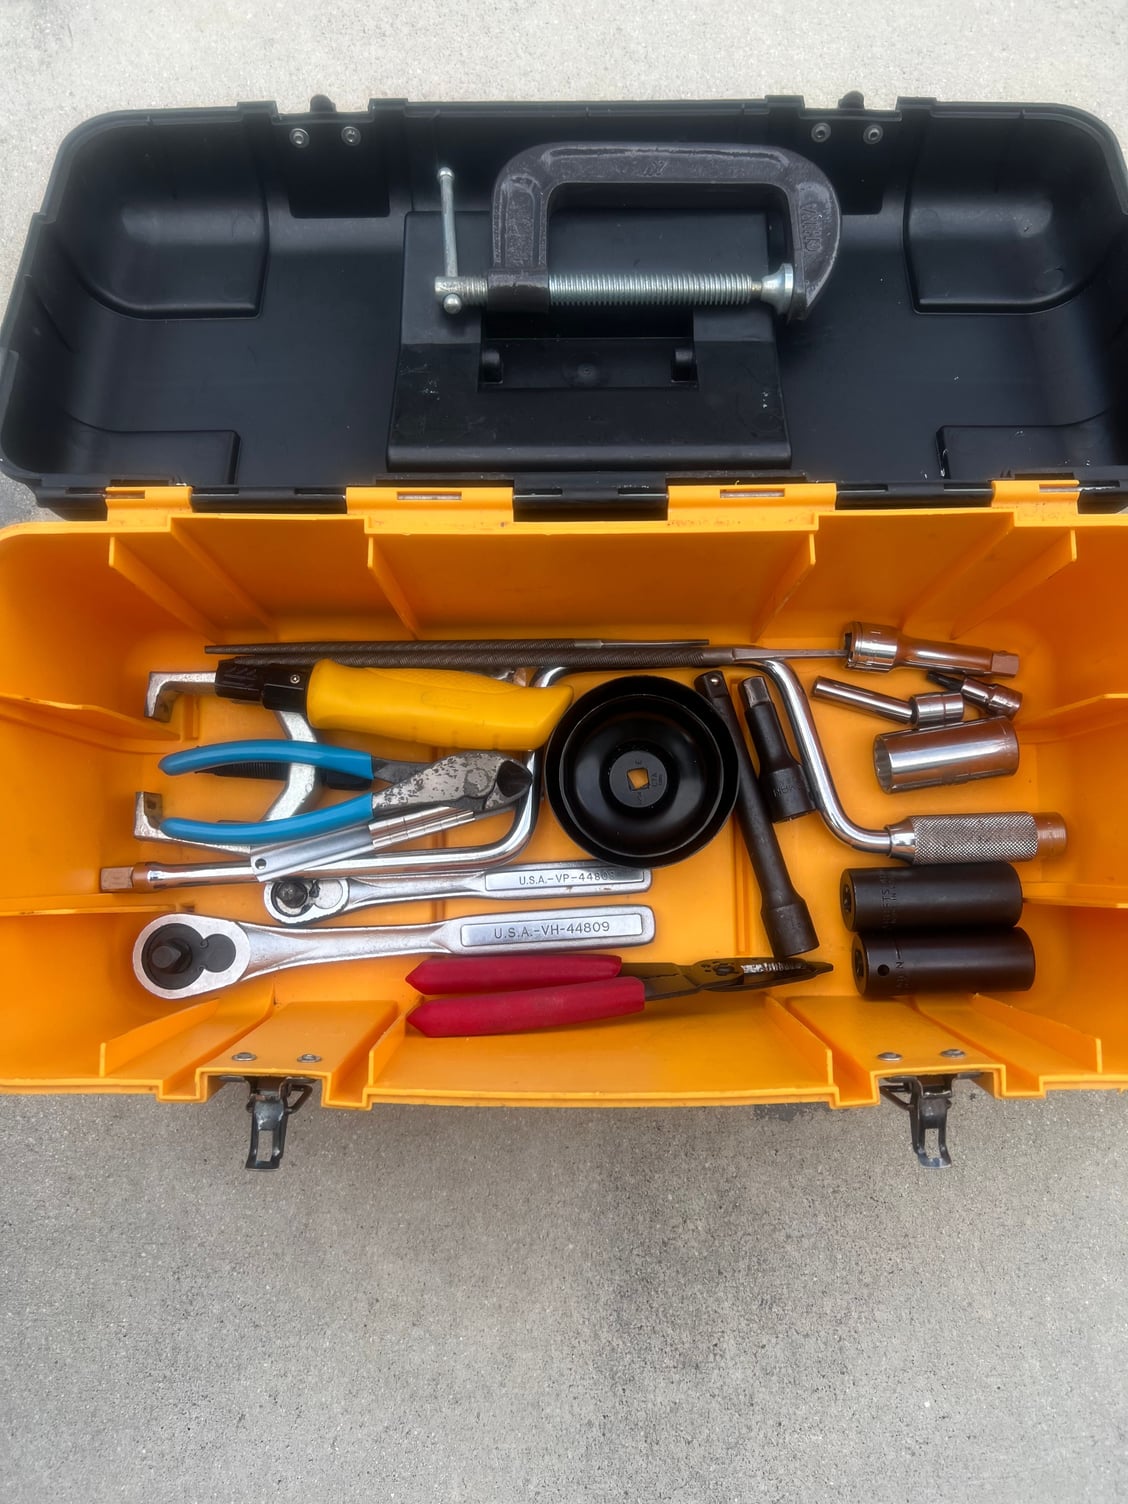 Assorted Tools Forsale. - The Hull Truth - Boating and Fishing Forum